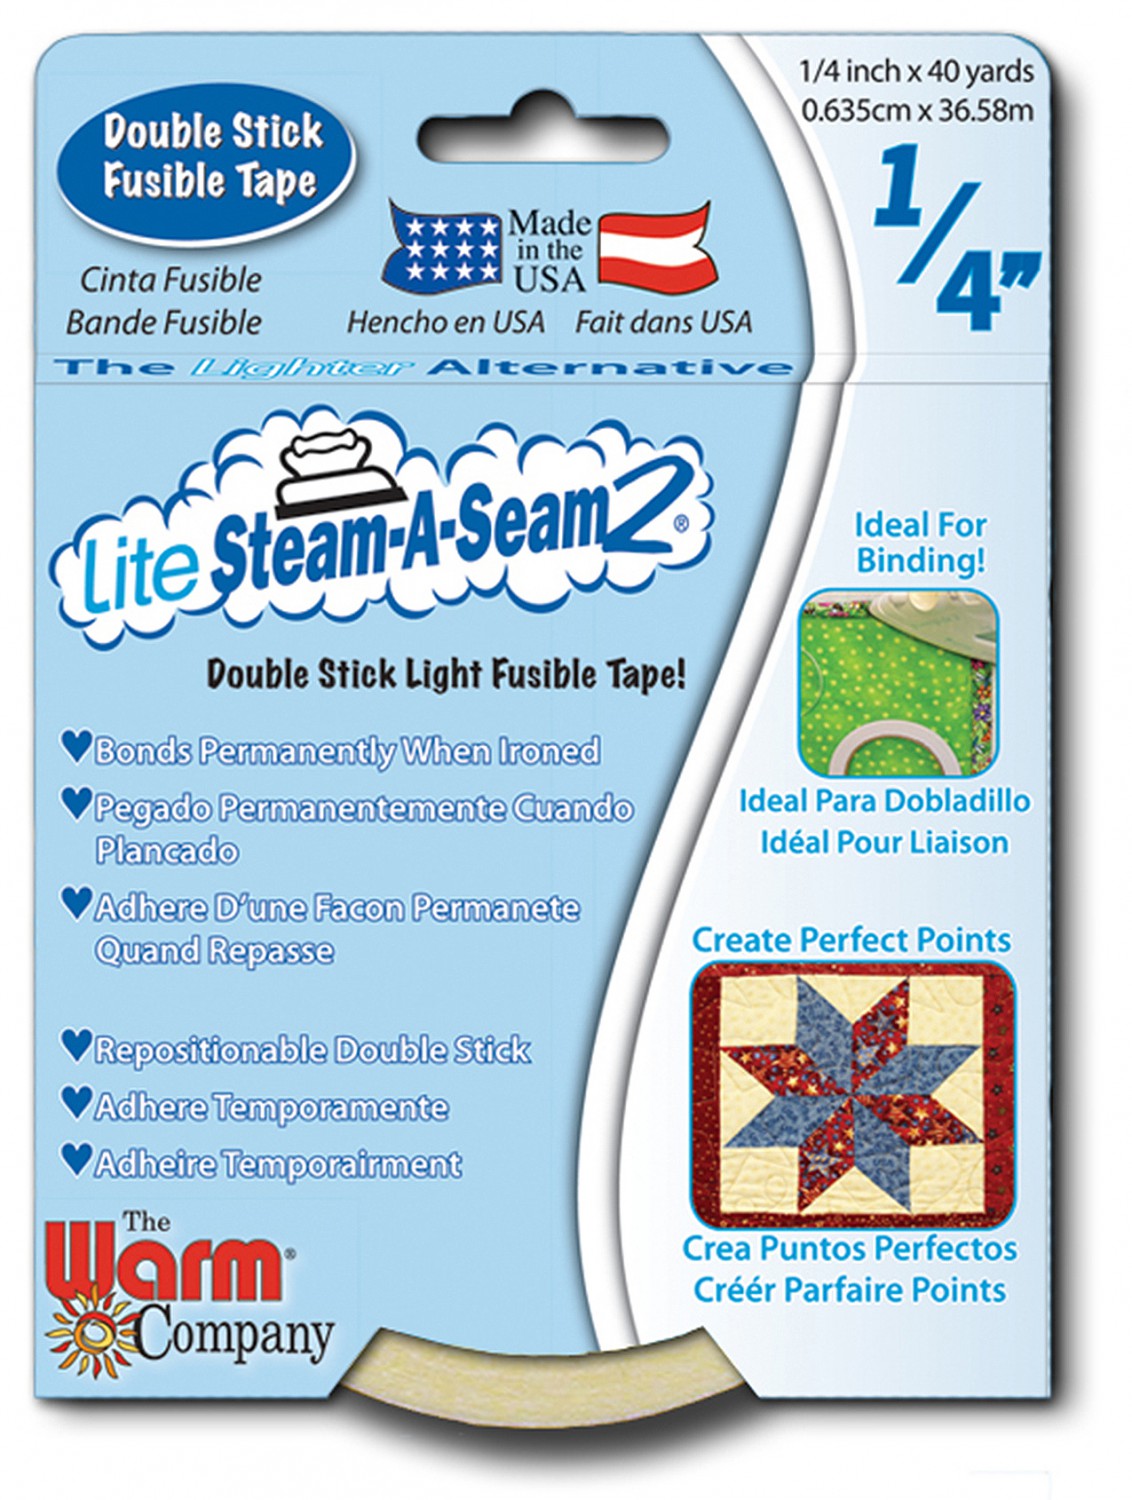 Lite Steam-A-Seam 2 Double Stick Fusible Tape 1/4in x 40yds from Warm Company